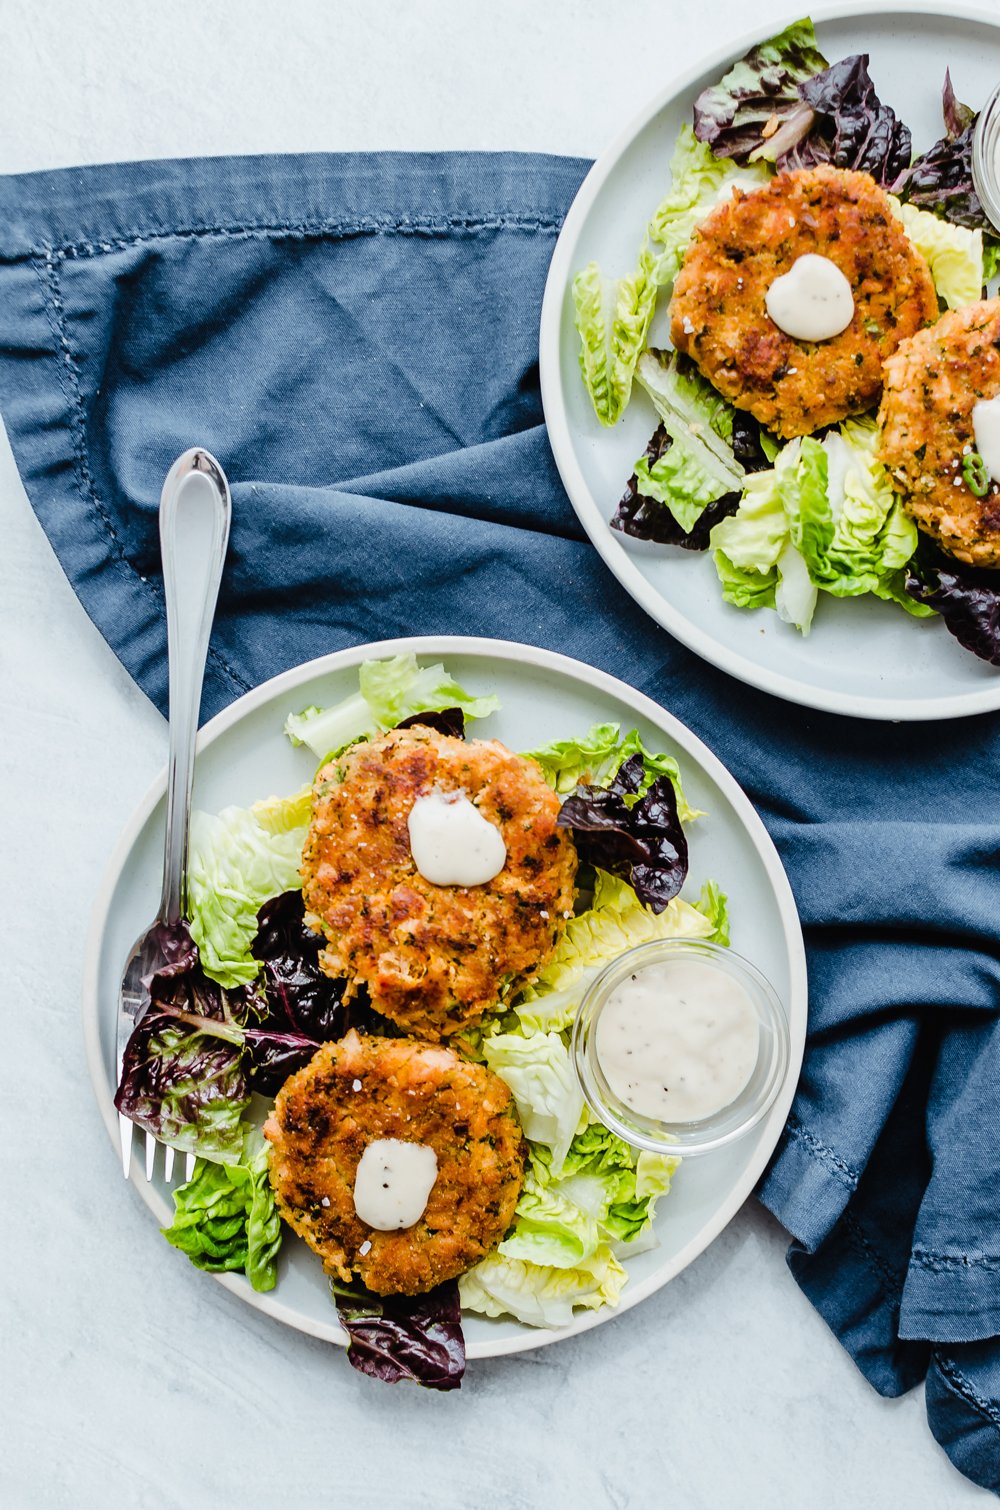 Salmon and sweet potato cakes on a bed of lettuce with avocado aioli being served on two plates.